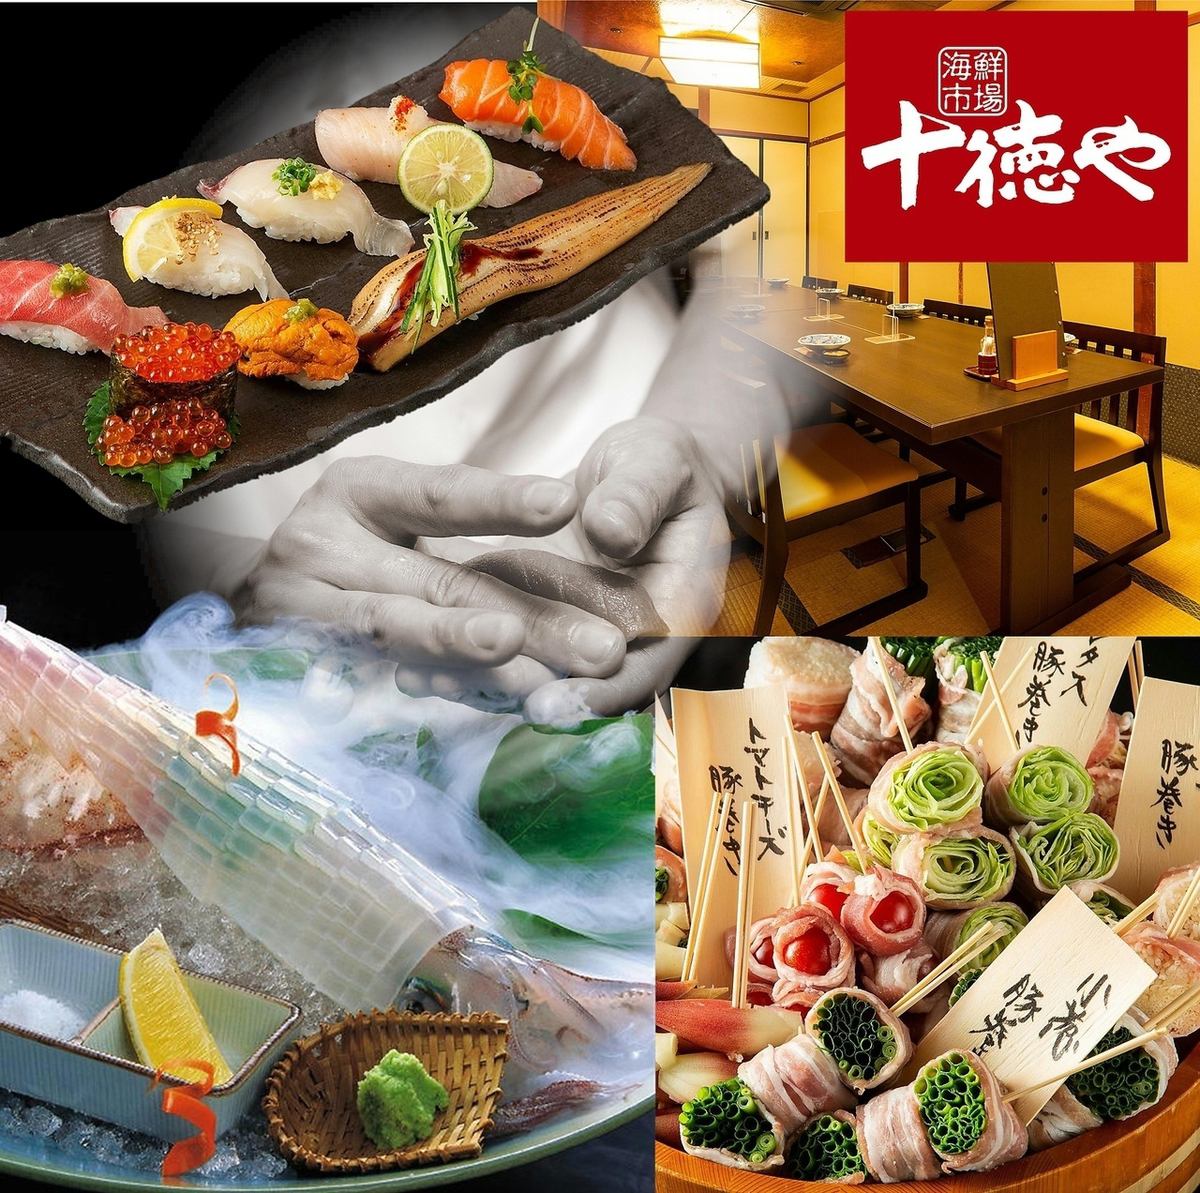 Beer compatibility ◎ The menu using yakitori and local chicken is also the pride of Totokuya ♪